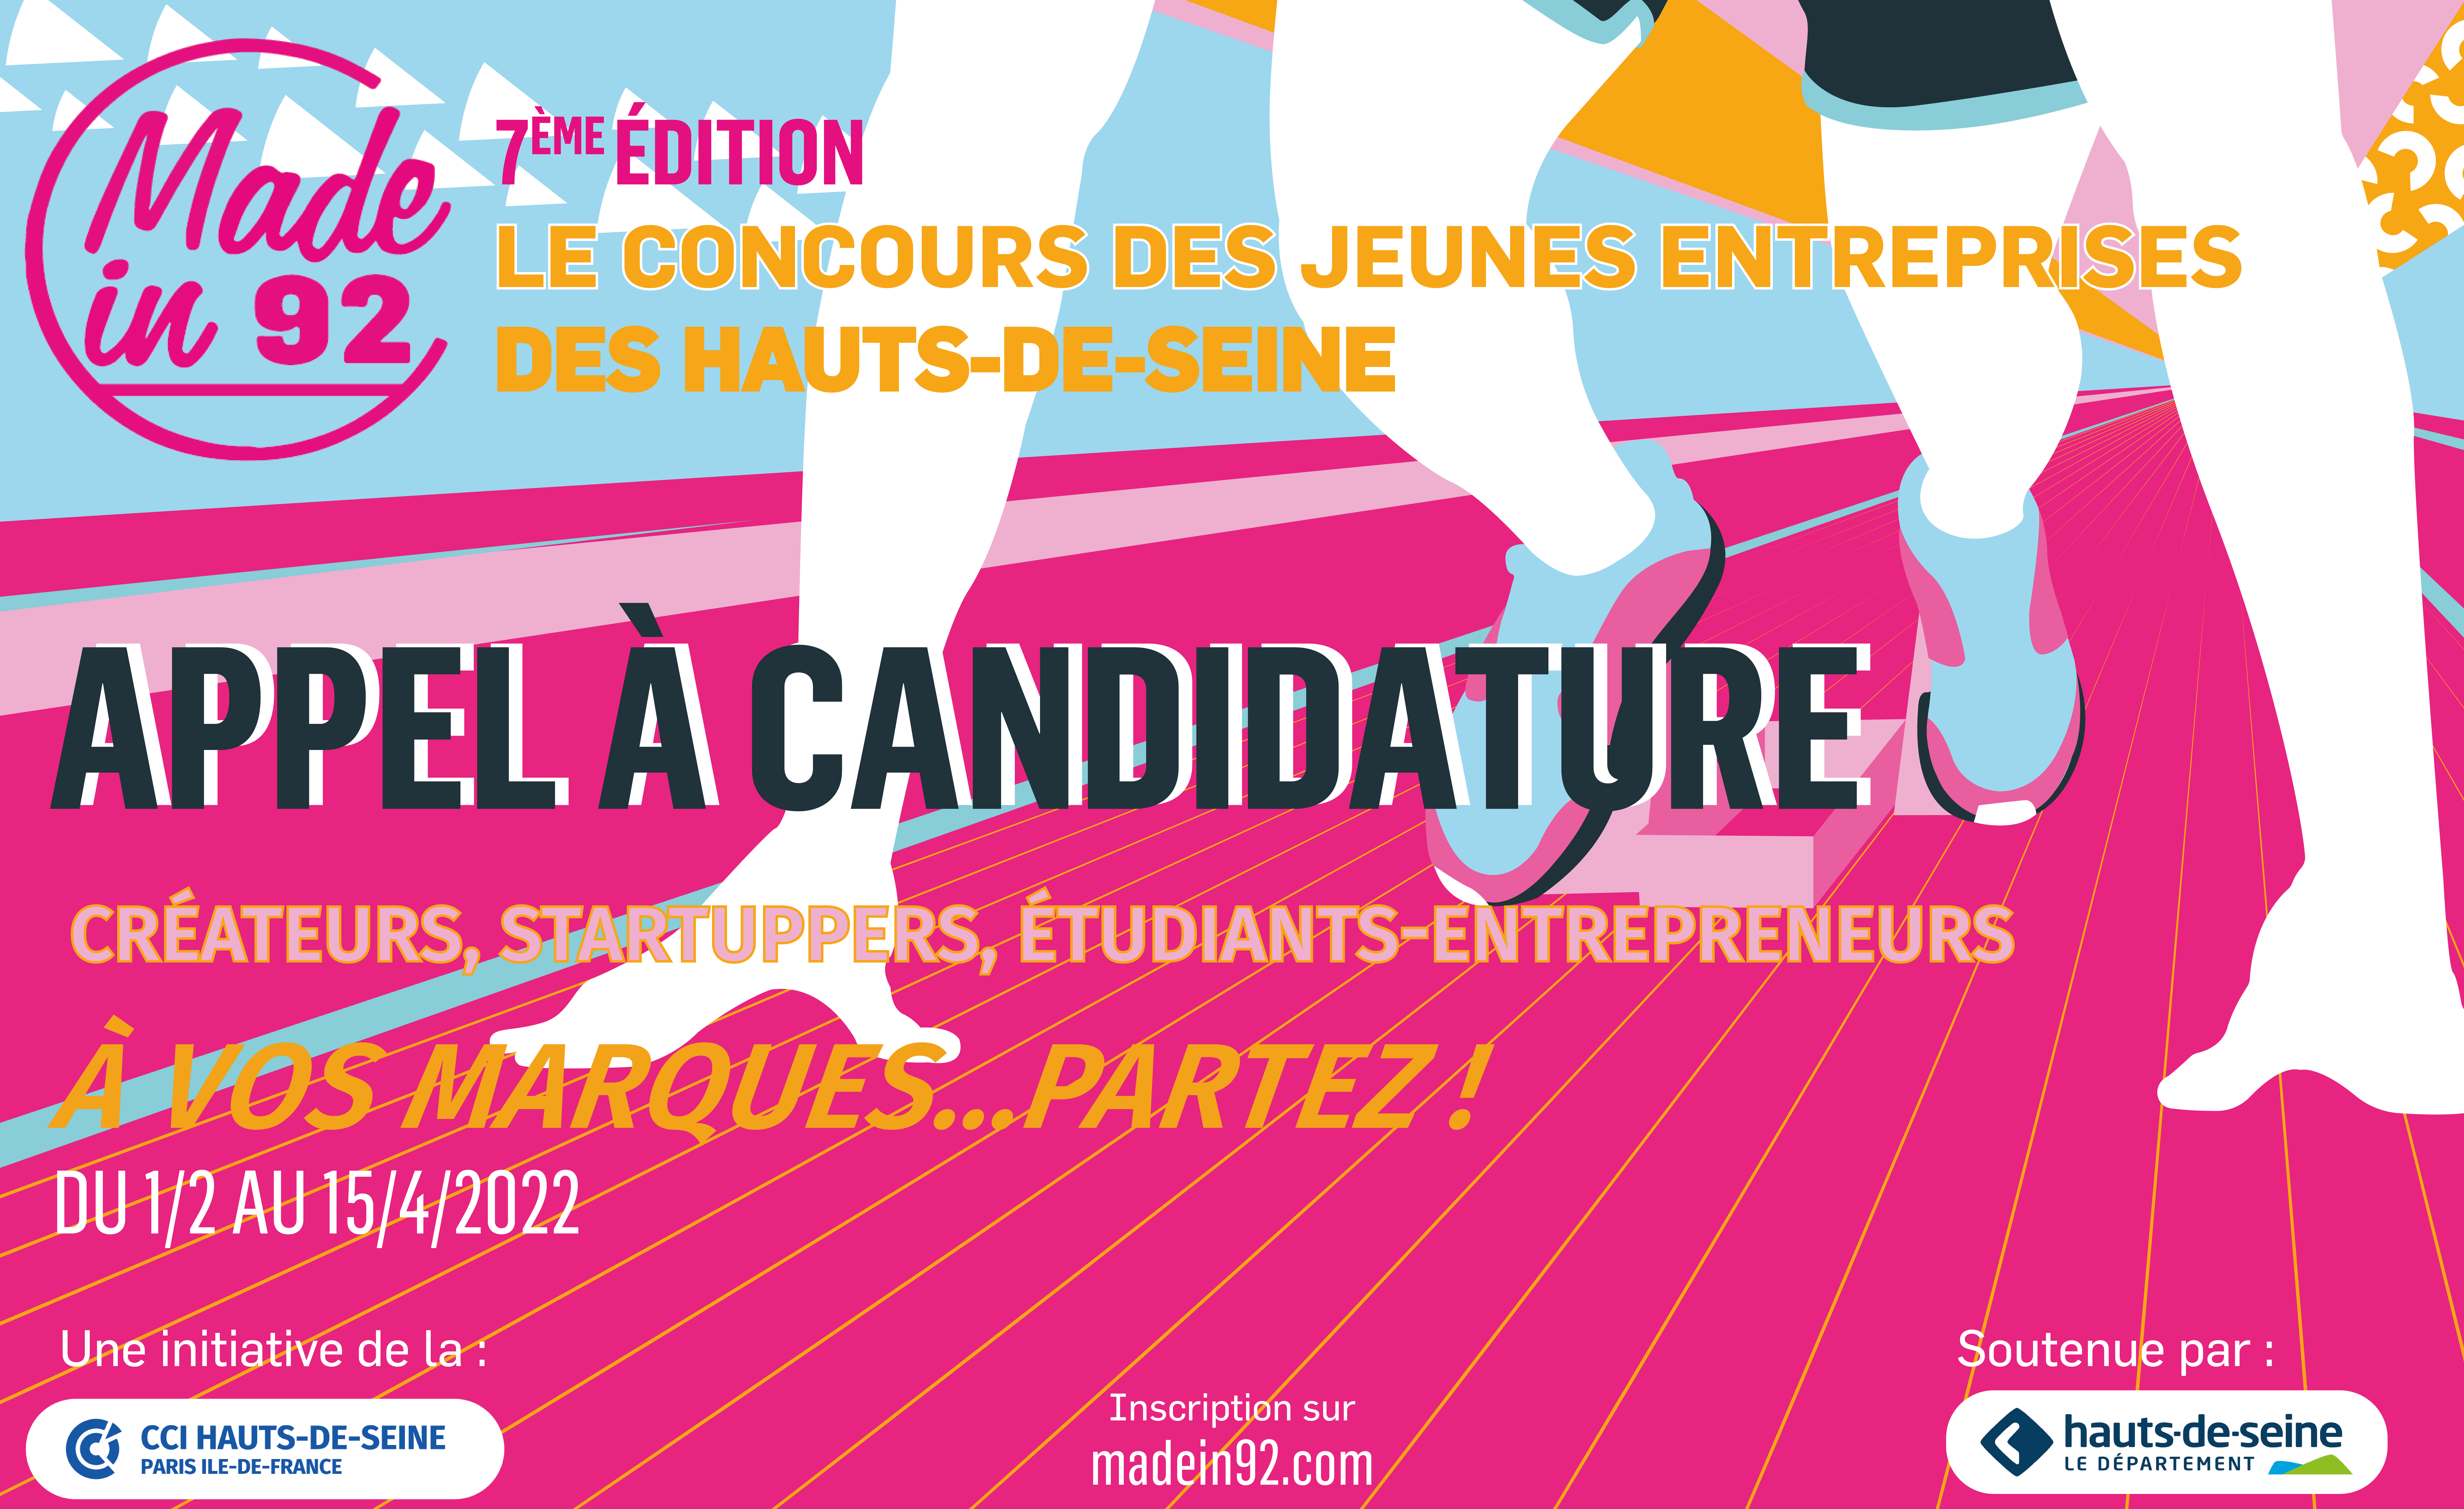 Concours made in 92